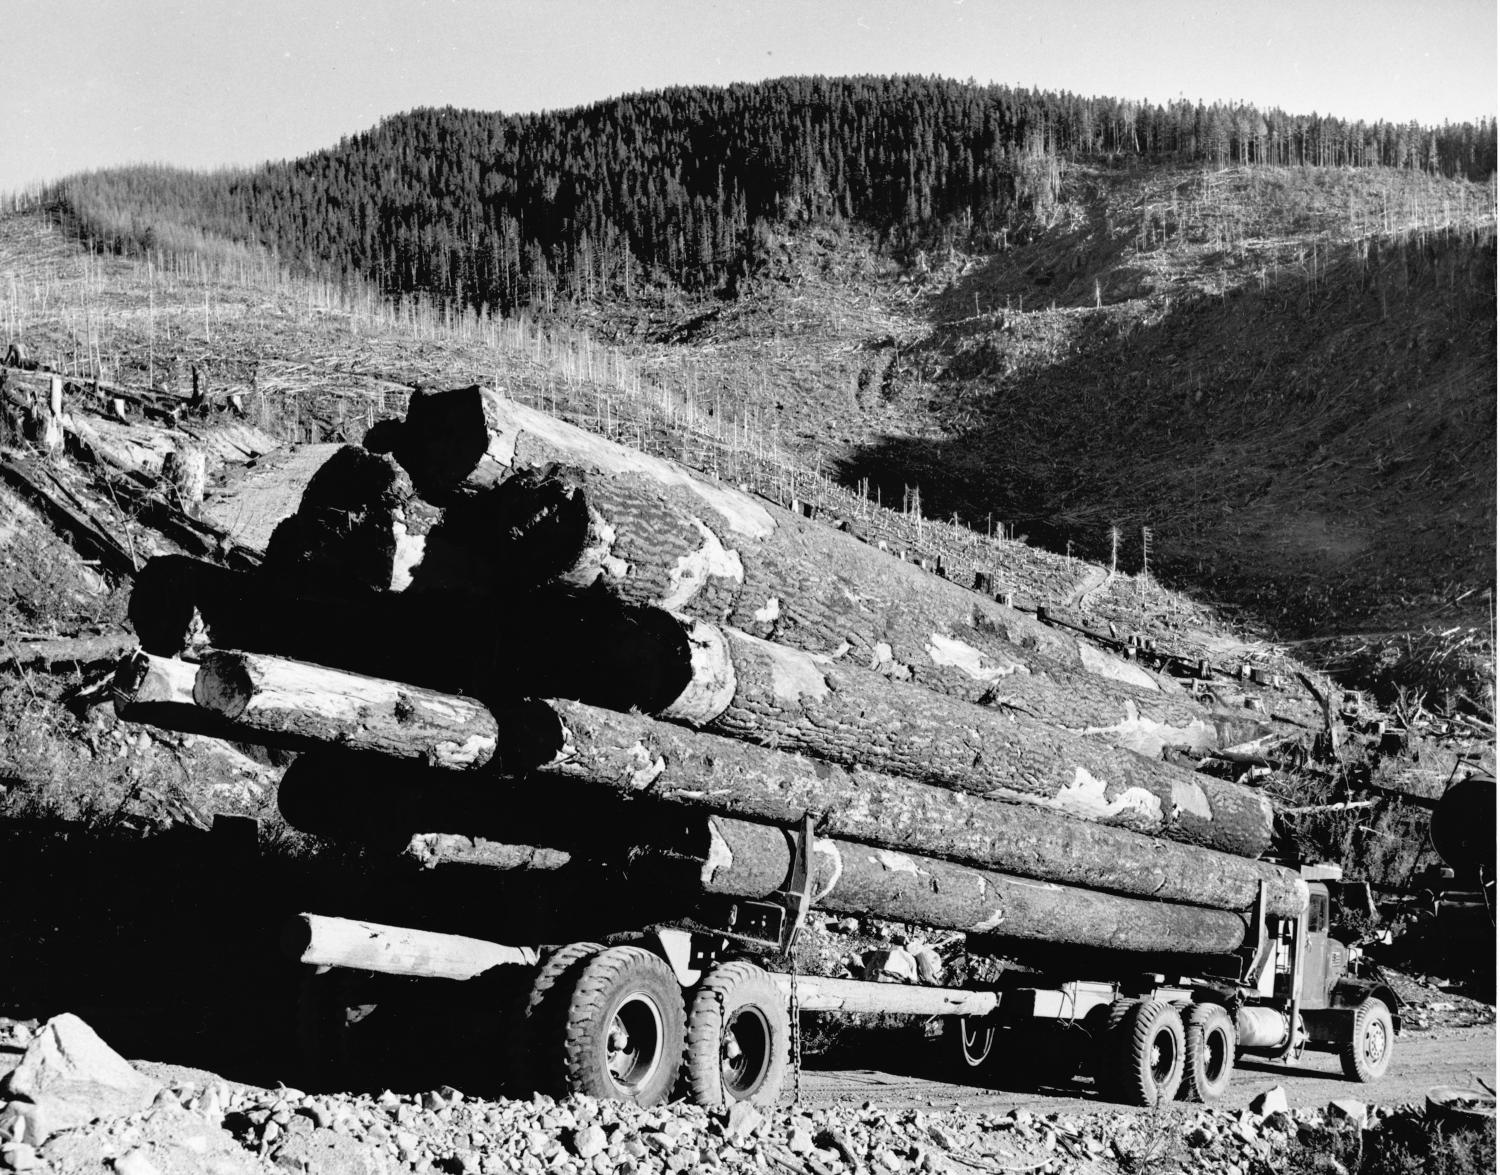 Loaded logging truck in front of a clear cut forest